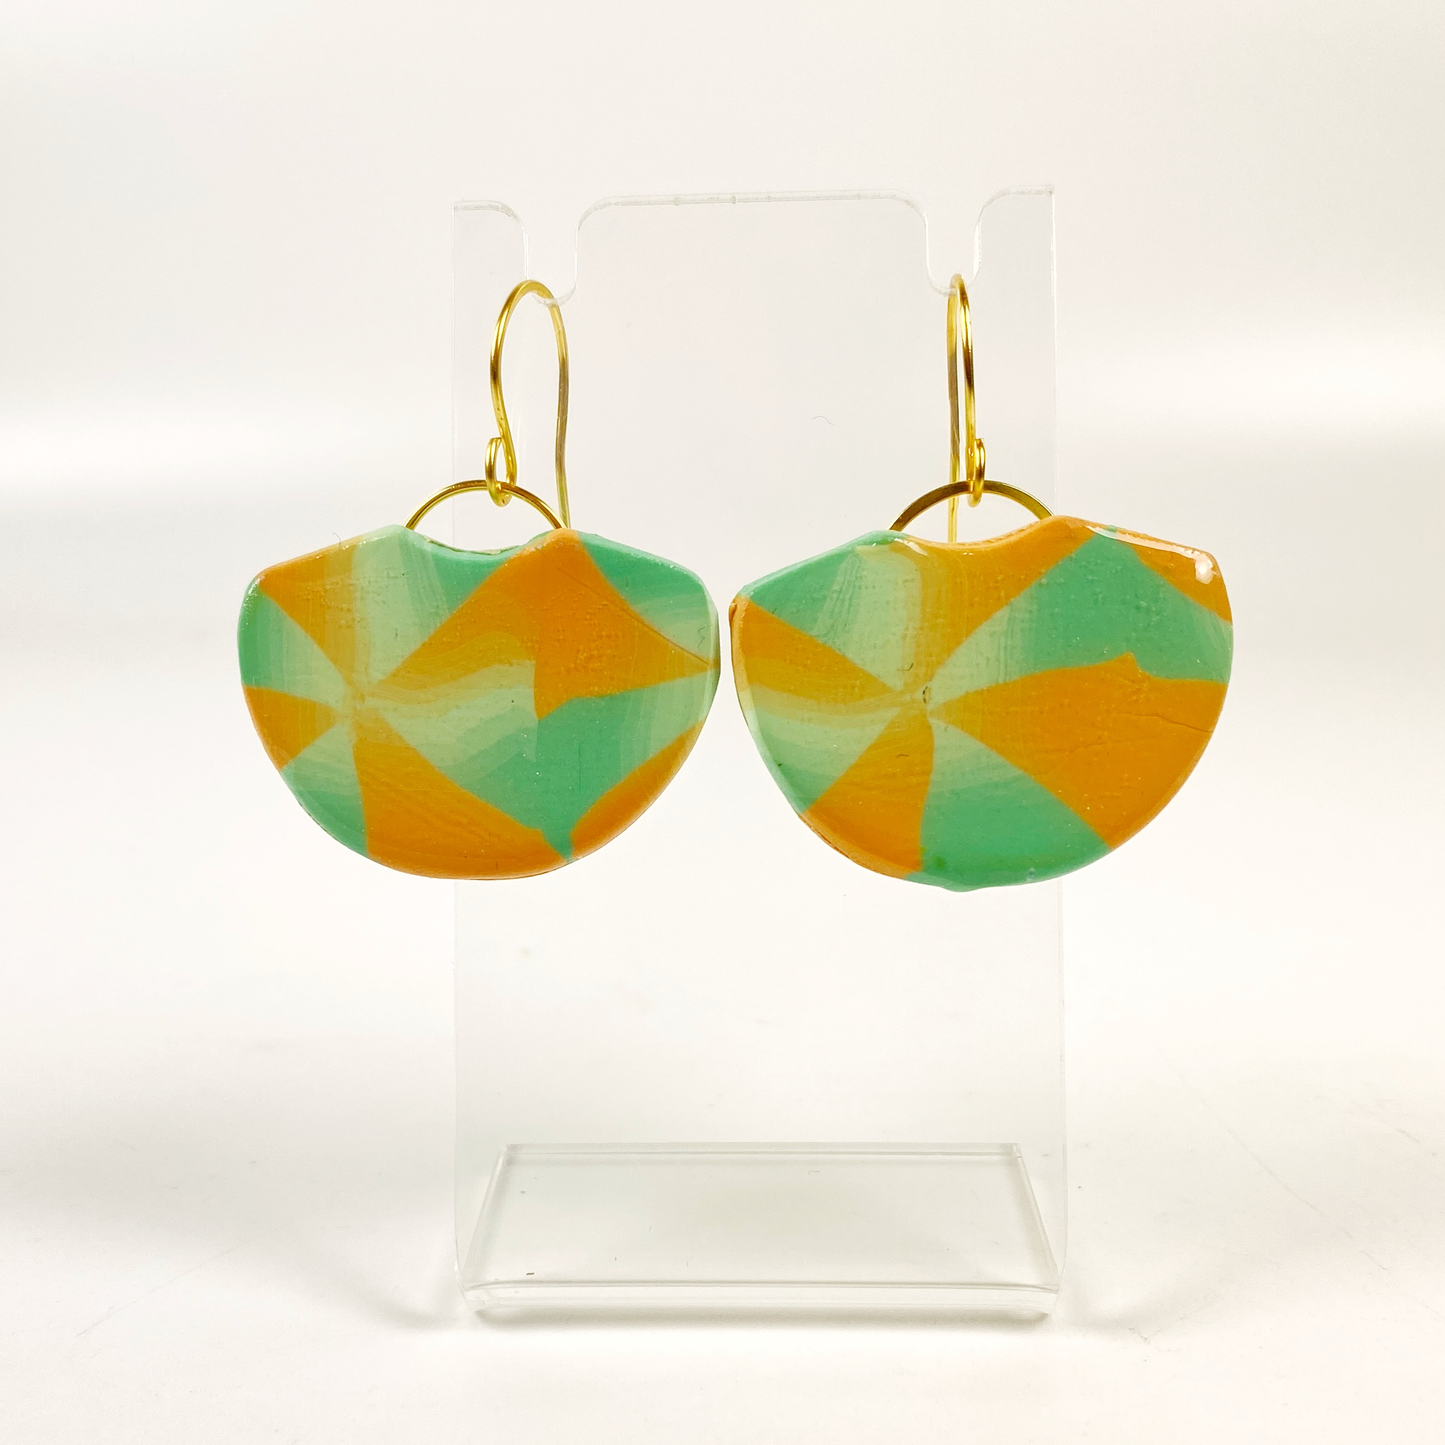 Desert Fan Handmade Polymer Clay Earrings on a small acrylic display stand